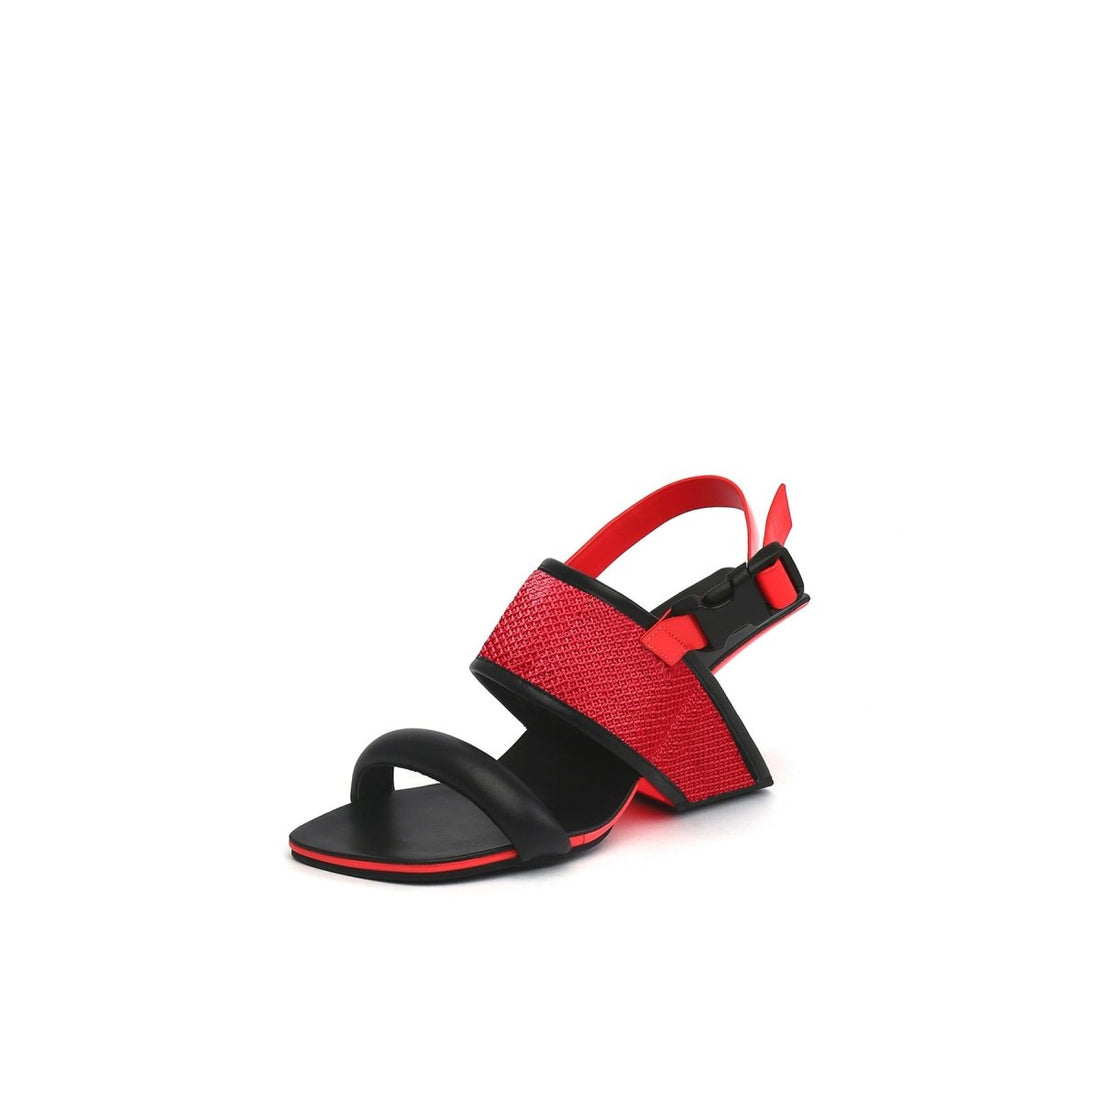 Cross Hollow Heeled Gradient Wide Strap Square Toe Red Sandals - 0cm